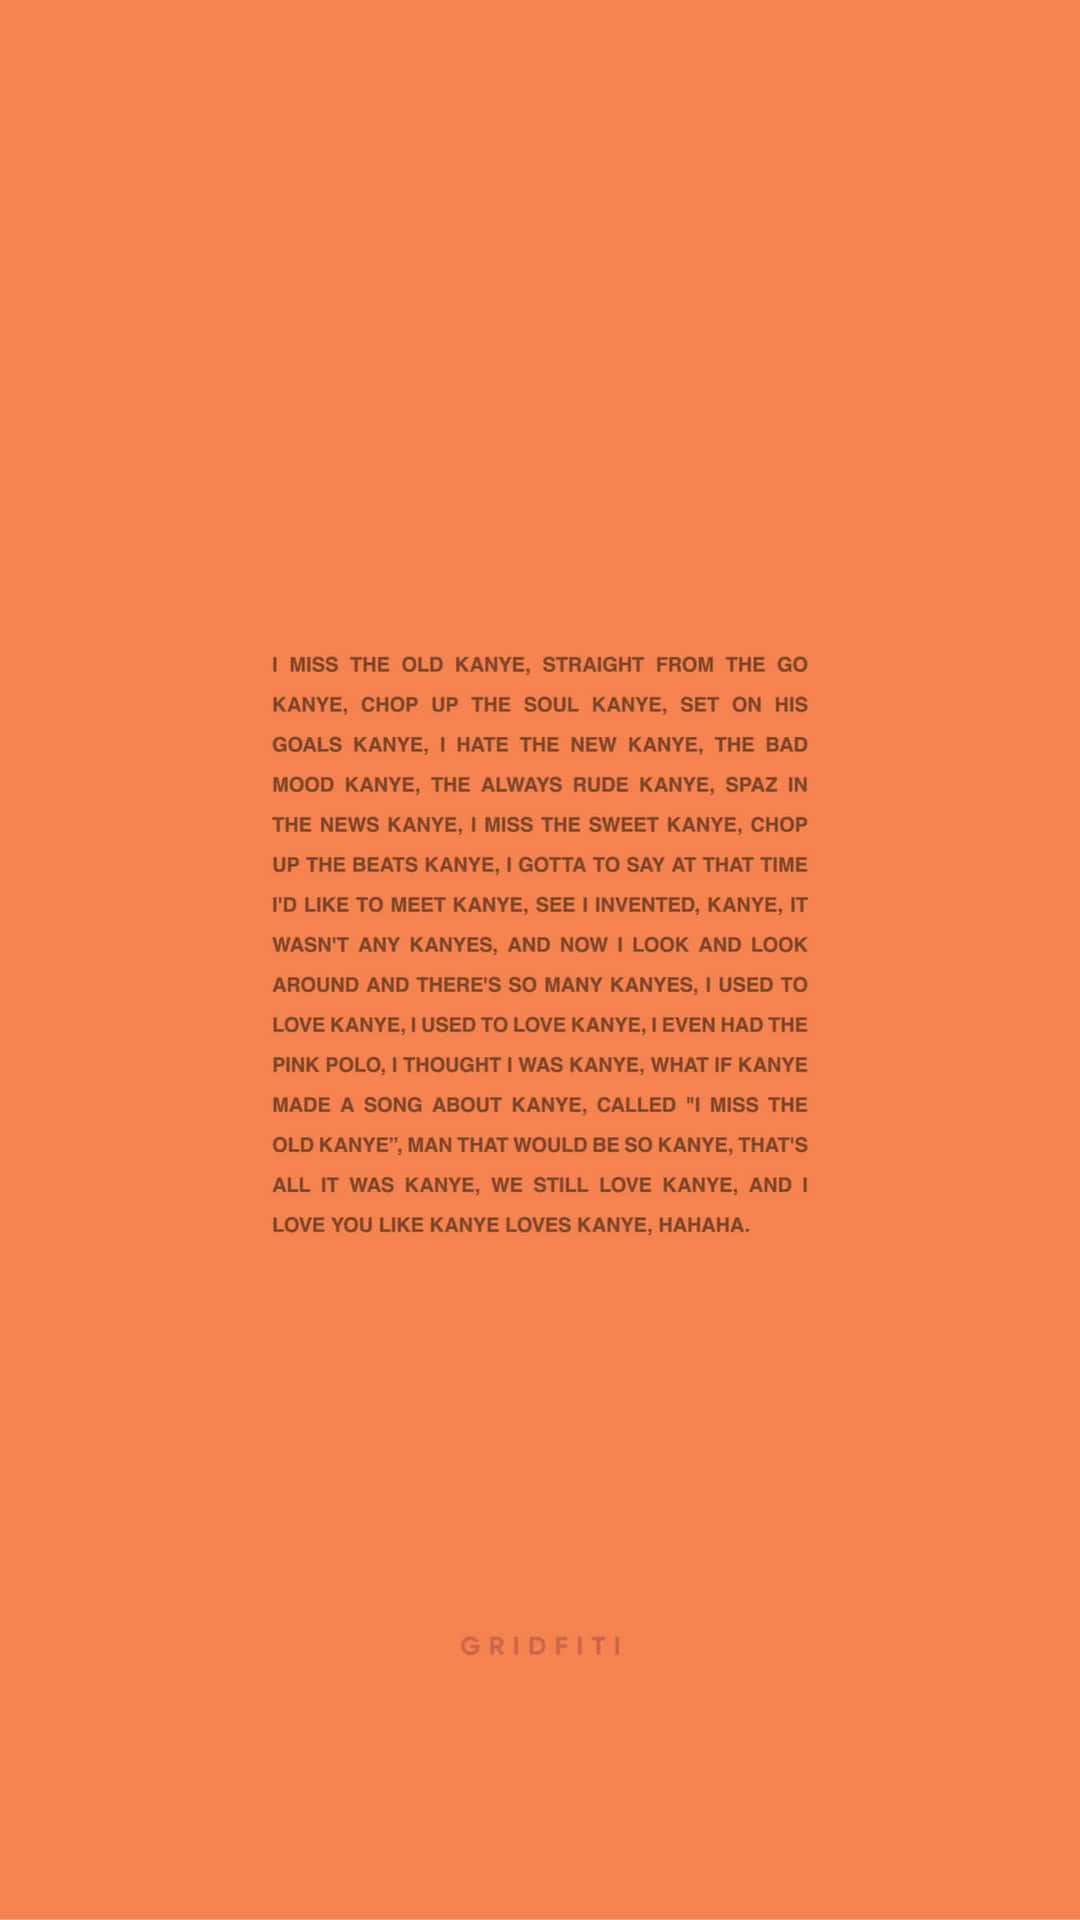 Kanye Wests album cover for The Life of Pablo is really really really  wordy